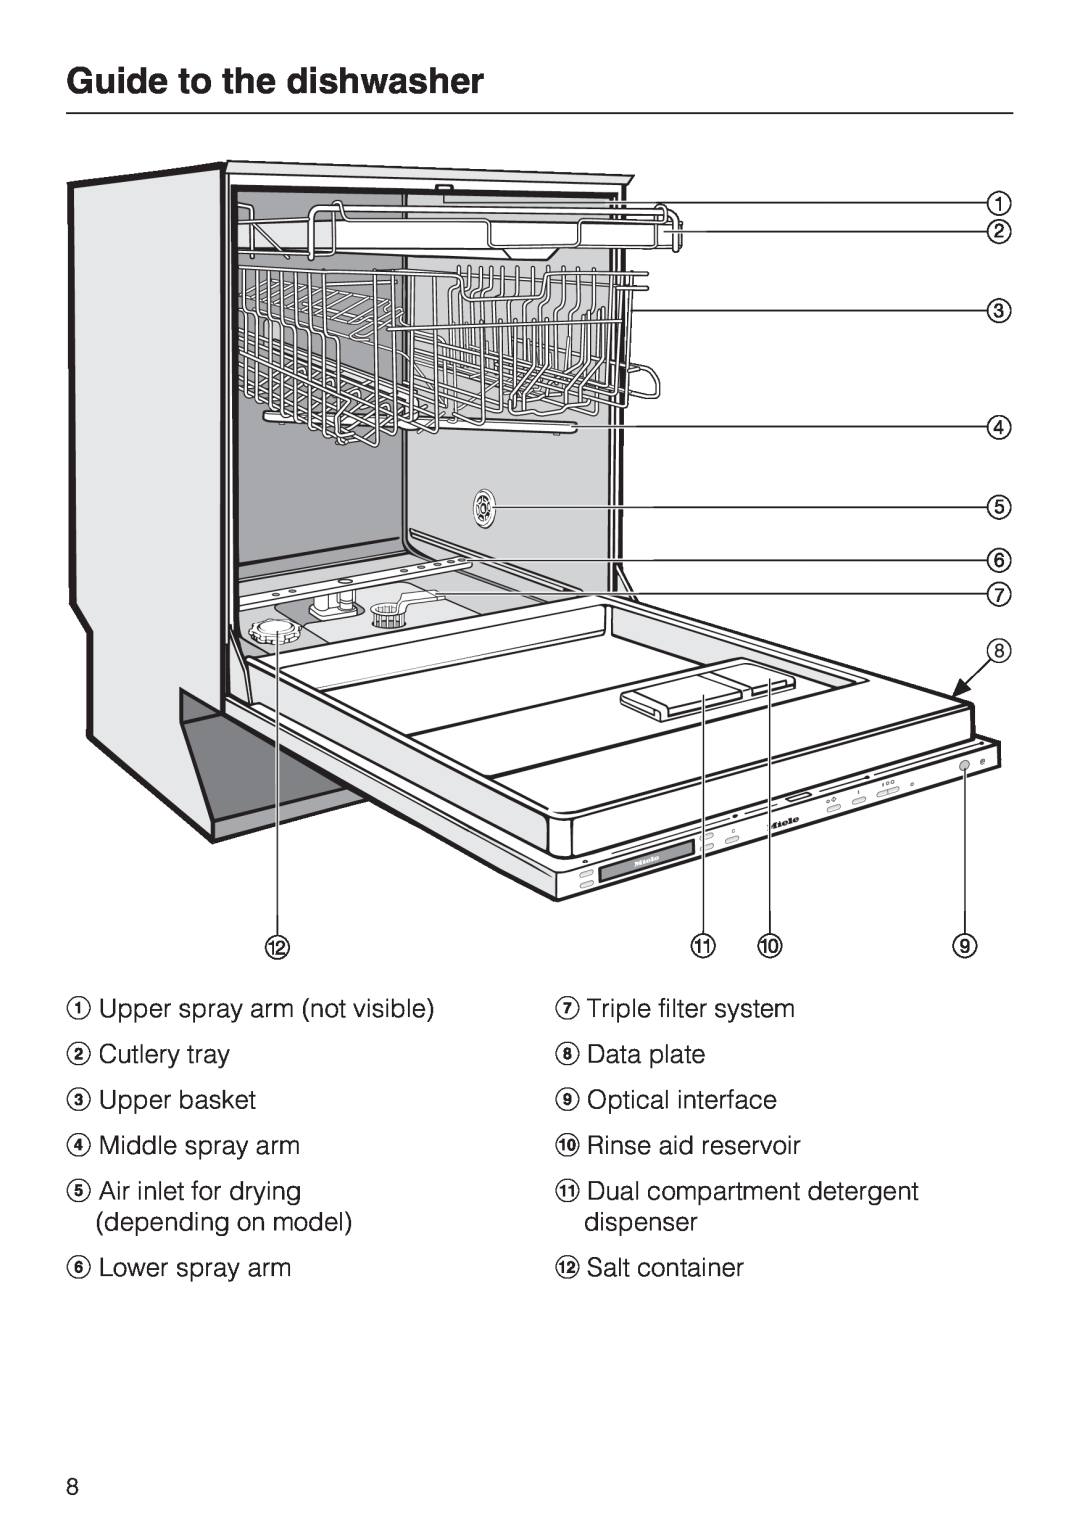 Miele G 2872 Guide to the dishwasher, Upper spray arm not visible Cutlery tray, Upper basket Middle spray arm 